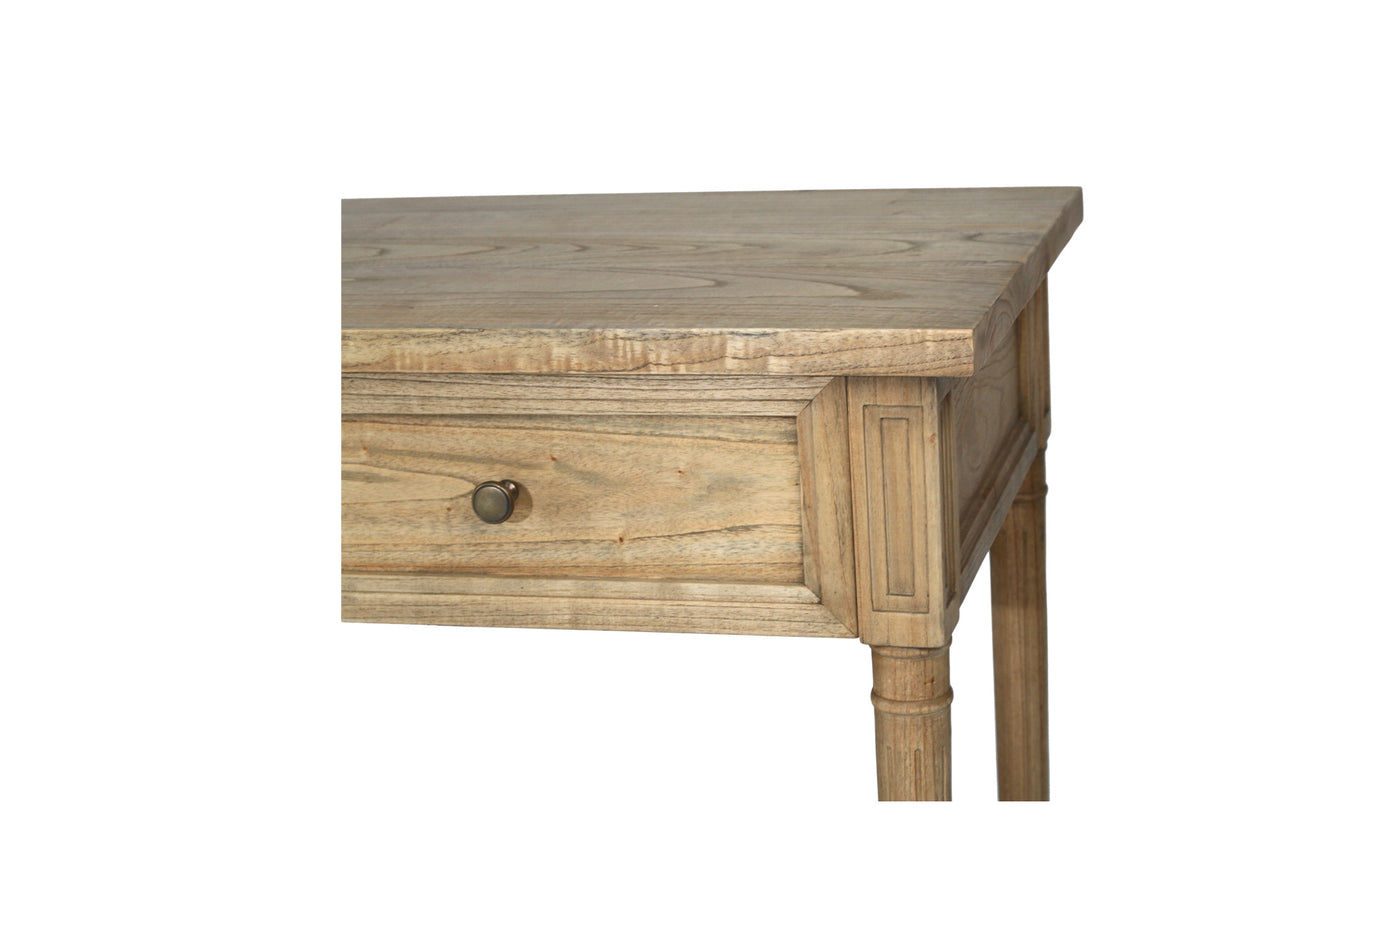 Daydream Cane Console Table - Weathered Oak - 100cm